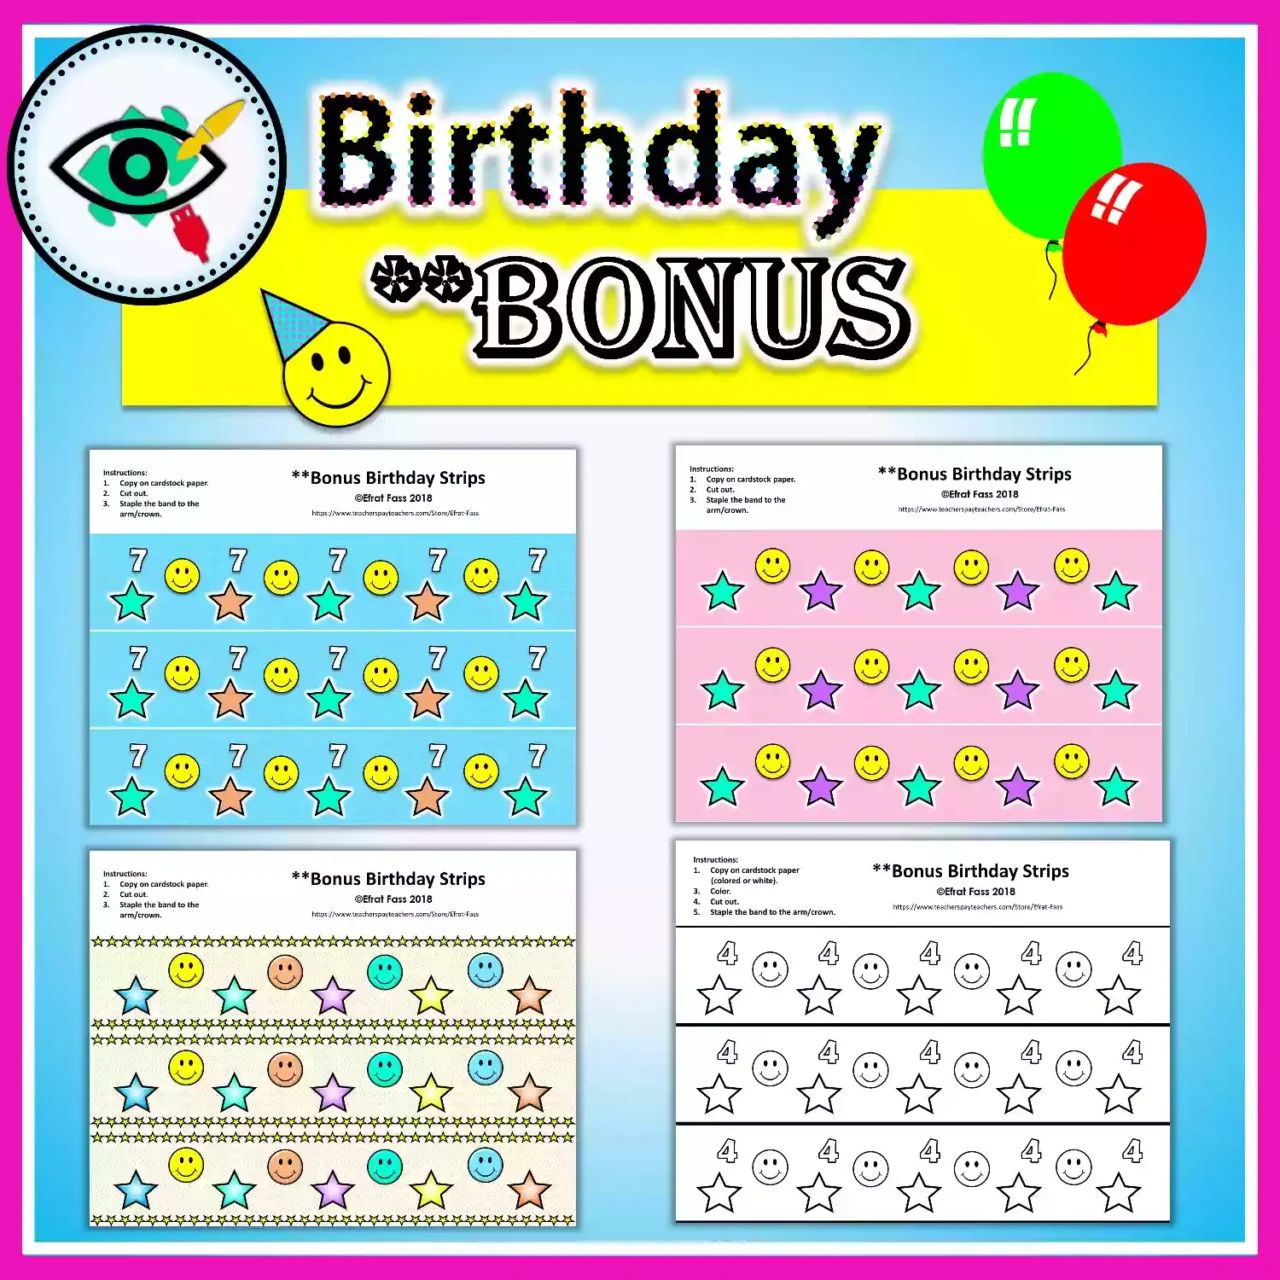 Crafts for Kids - Birthday Crowns - Featured 3